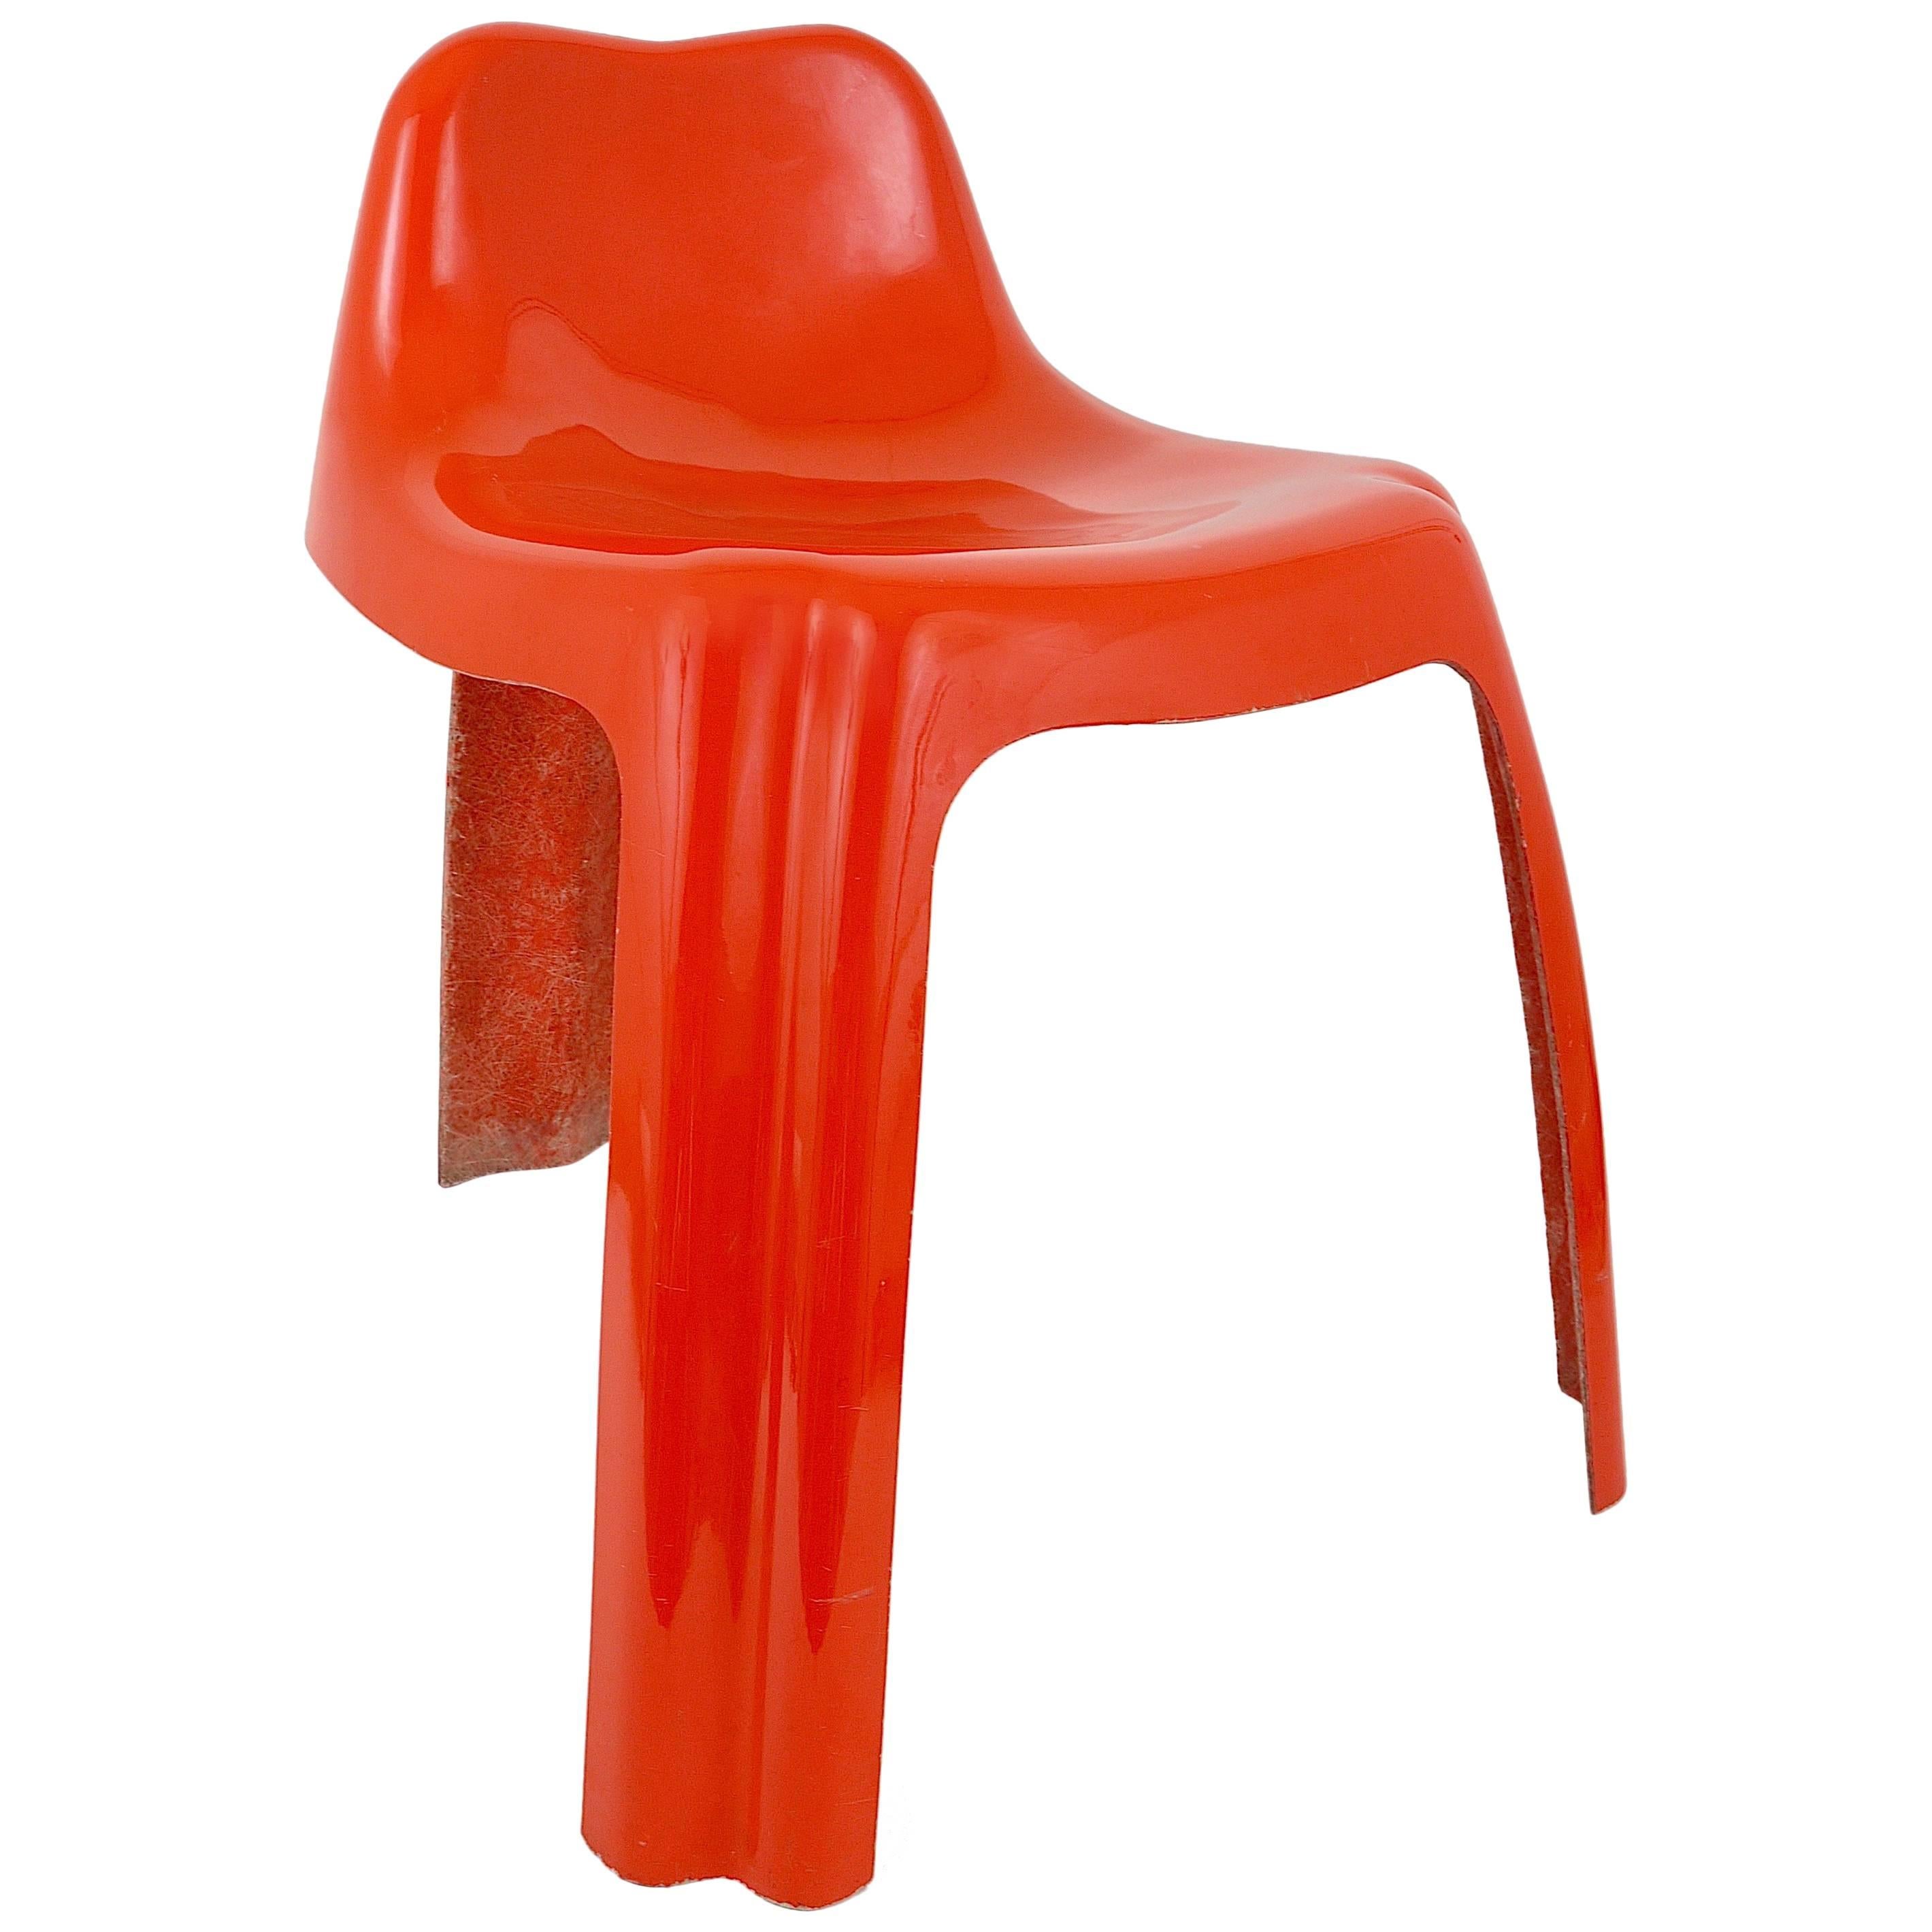 Orange Fiberglass Chair Ginger by Patrick Gingembre, Paulus, France, 1970s